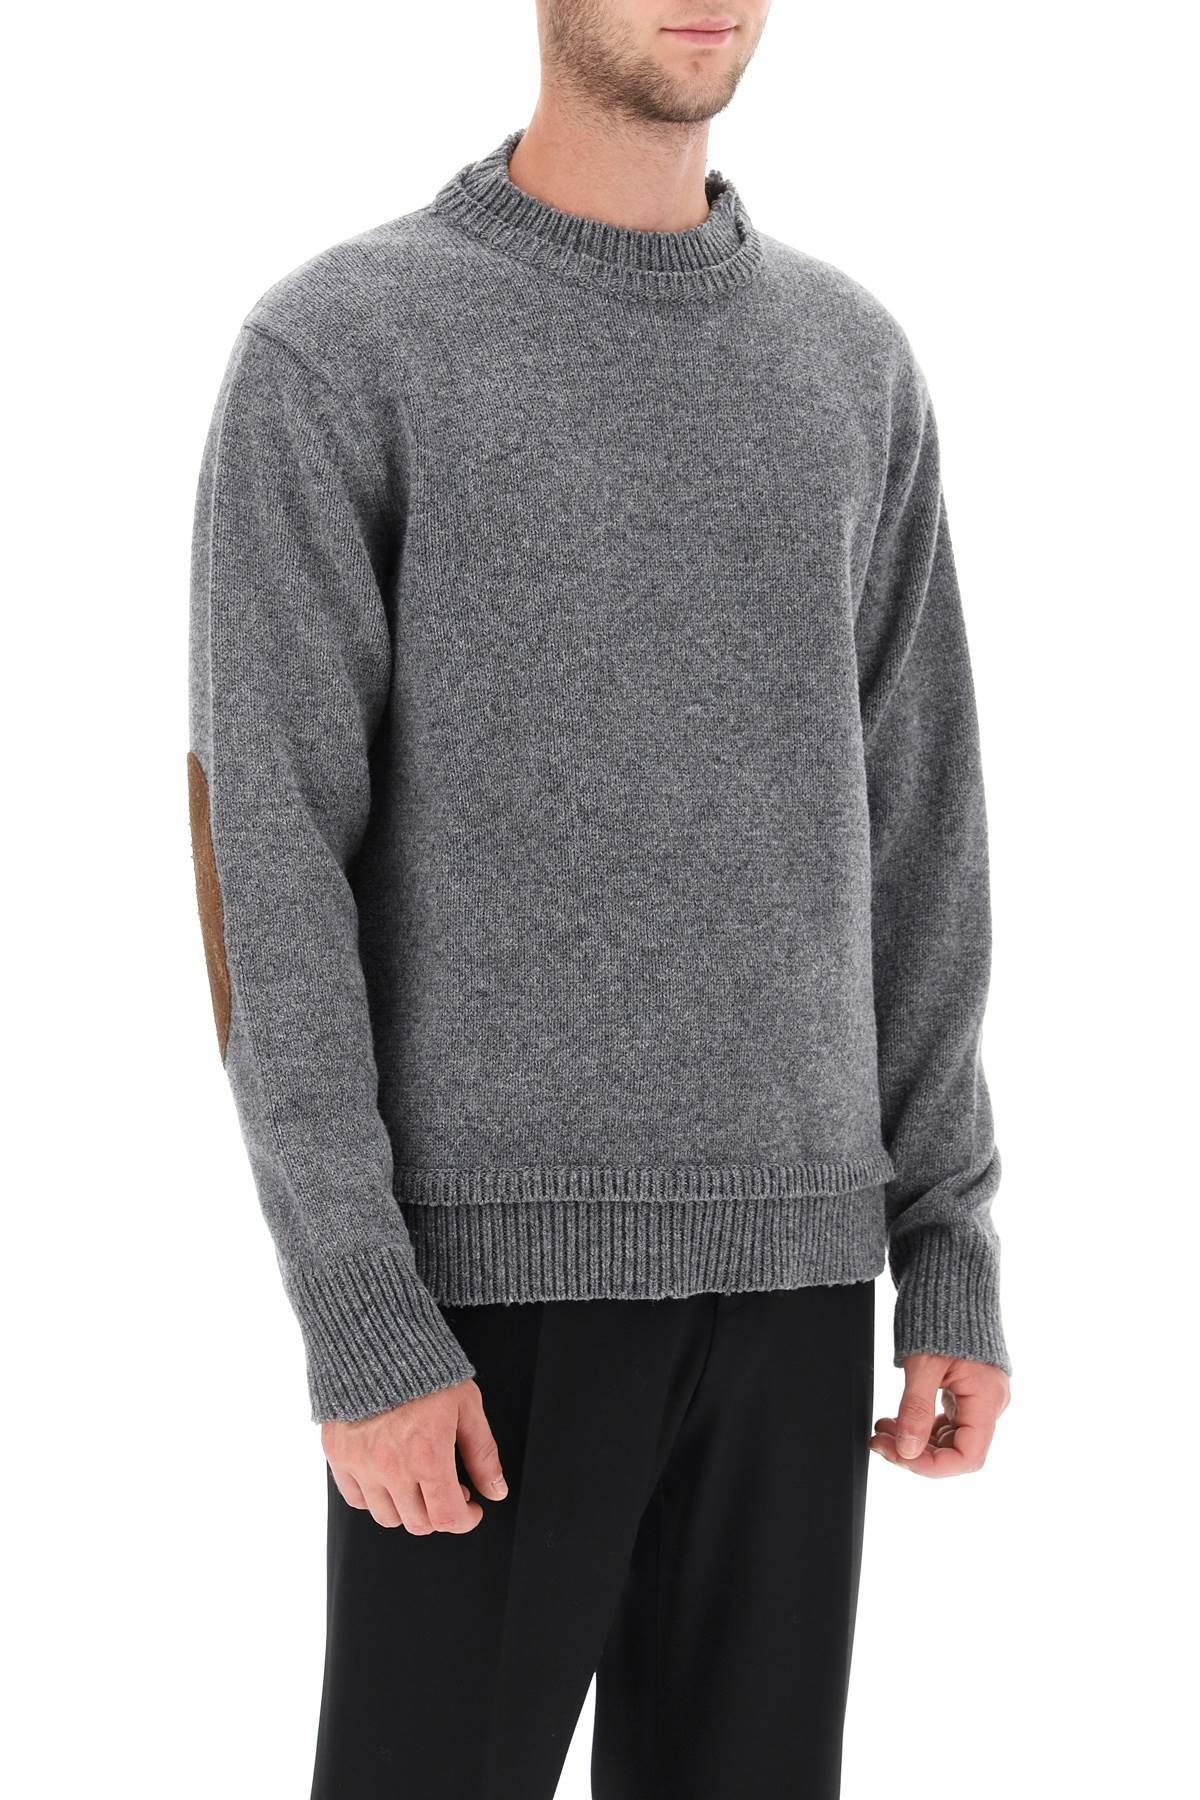 CREW NECK SWEATER WITH ELBOW PATCHES - 3